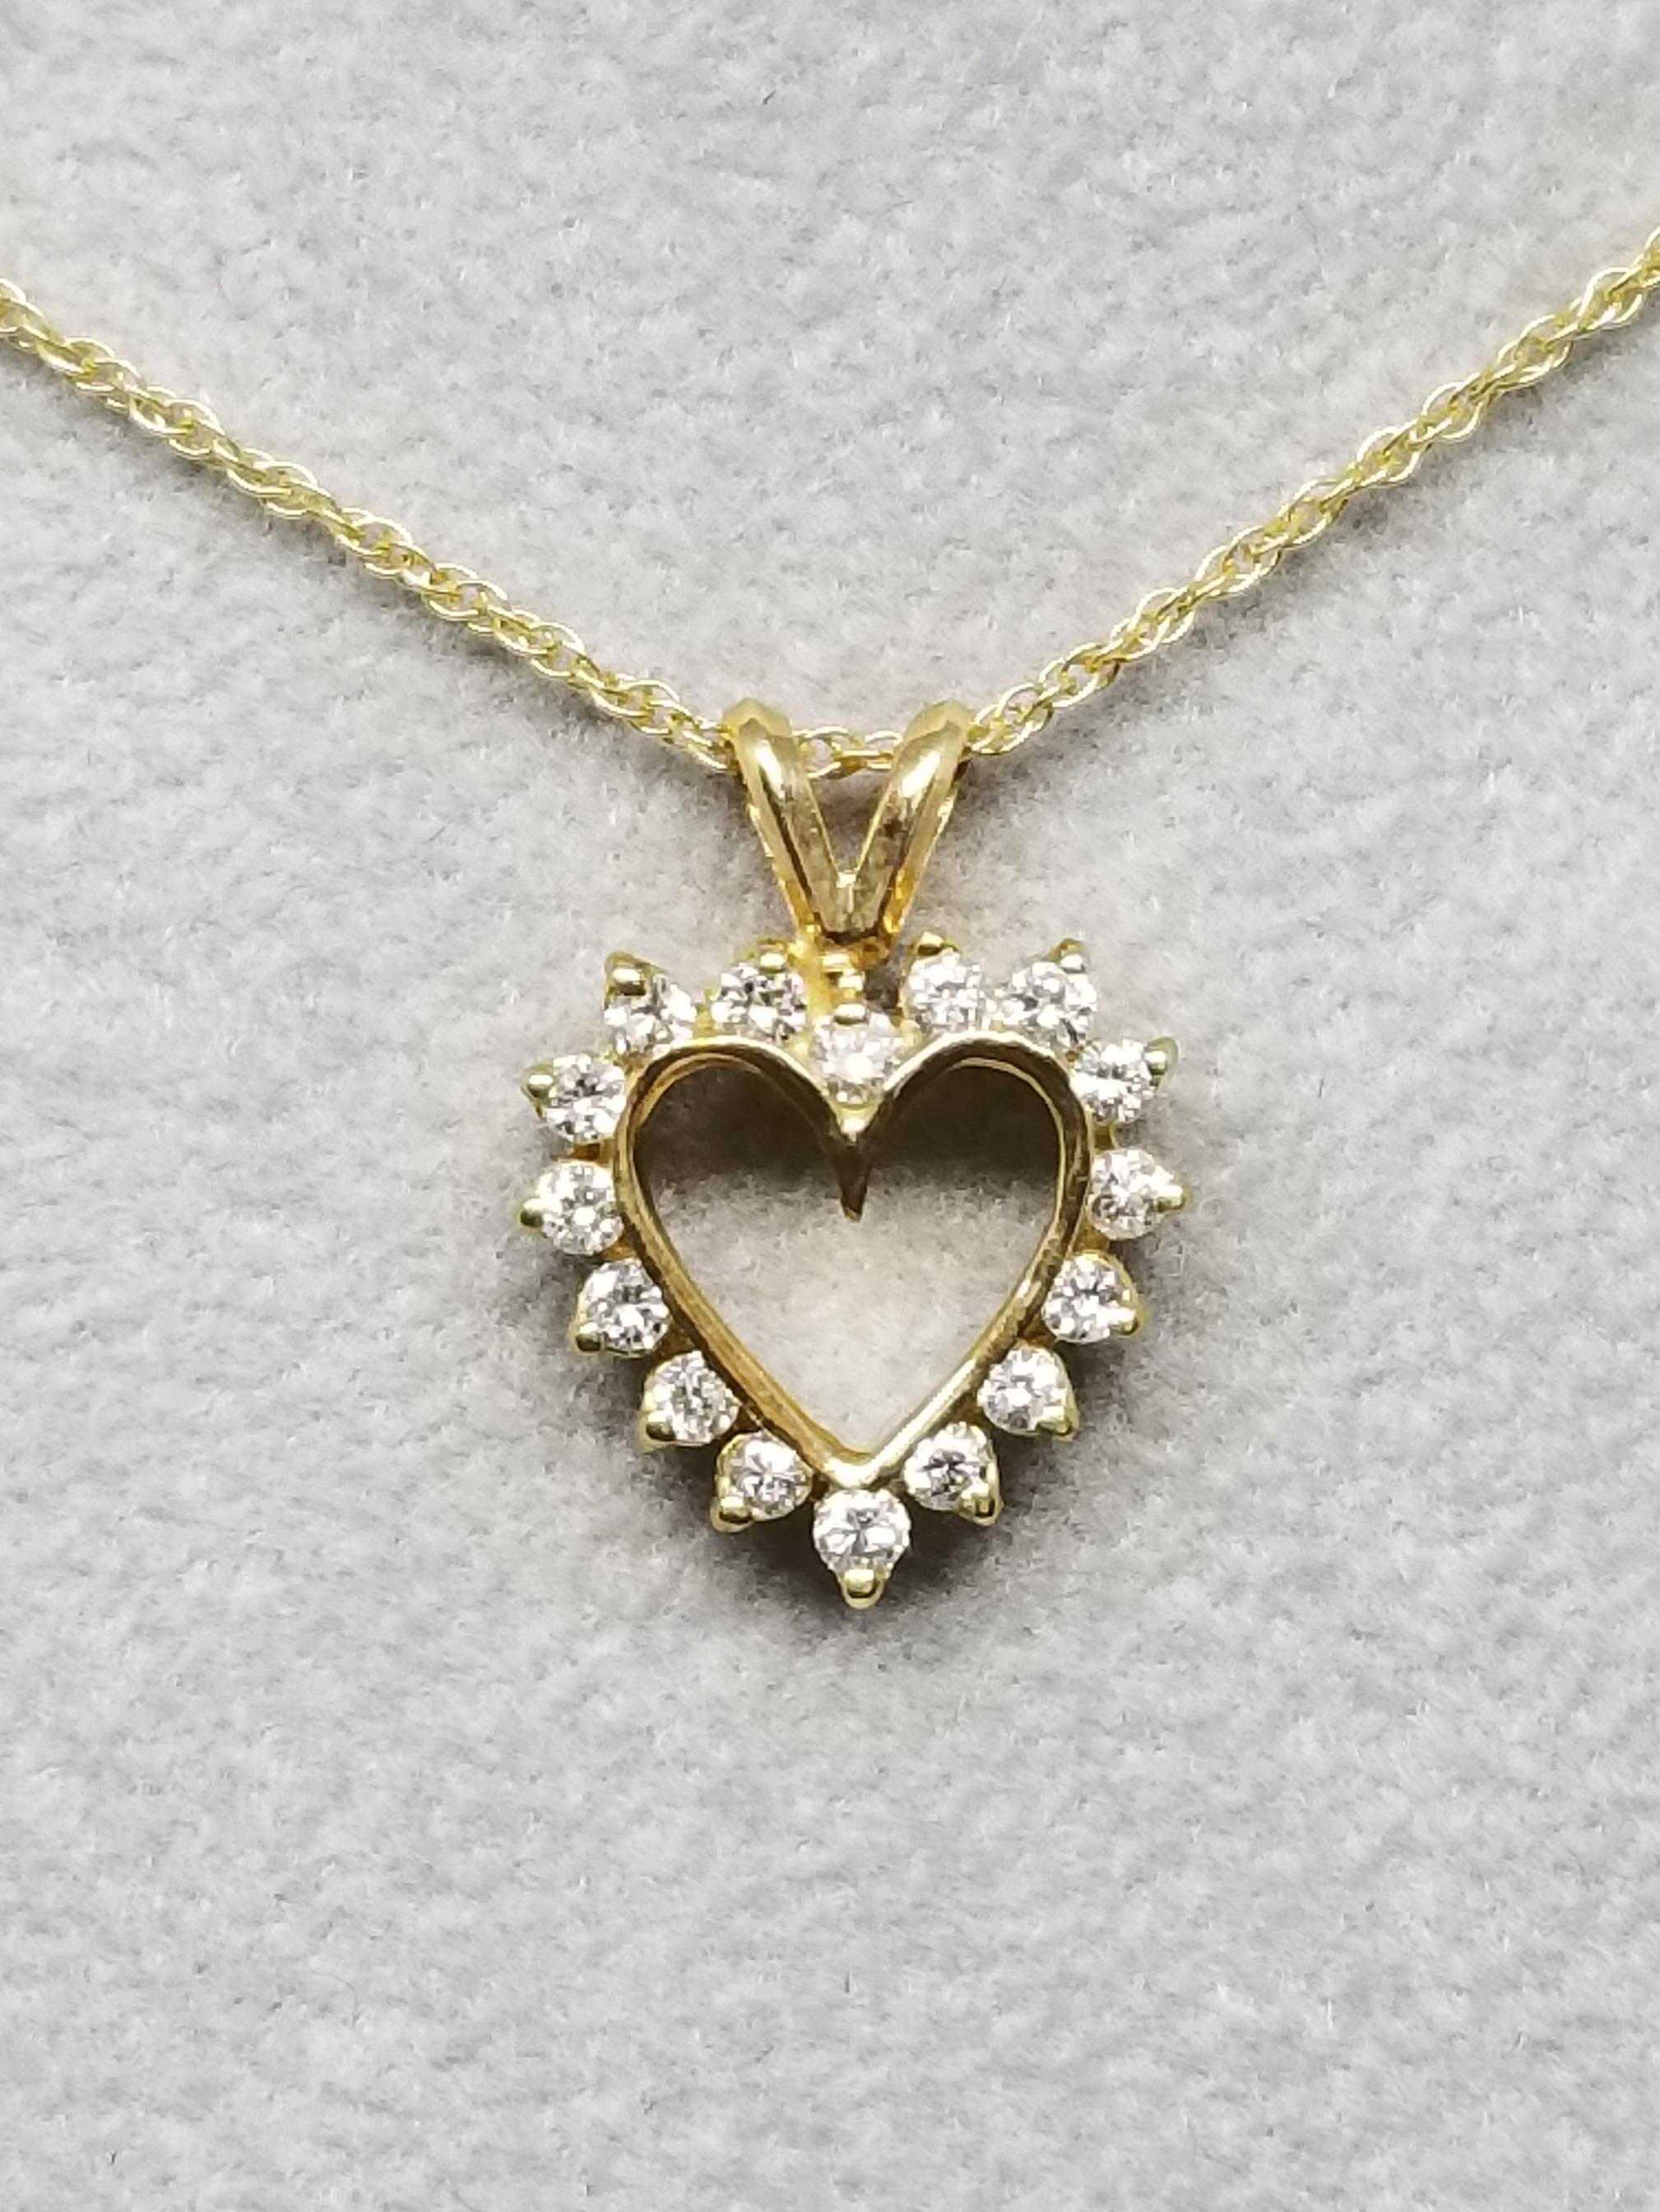 14k yellow gold diamond heart containing 16 round full cut diamonds of very fine quality weighing .35pts.  on a 16 inch chain.